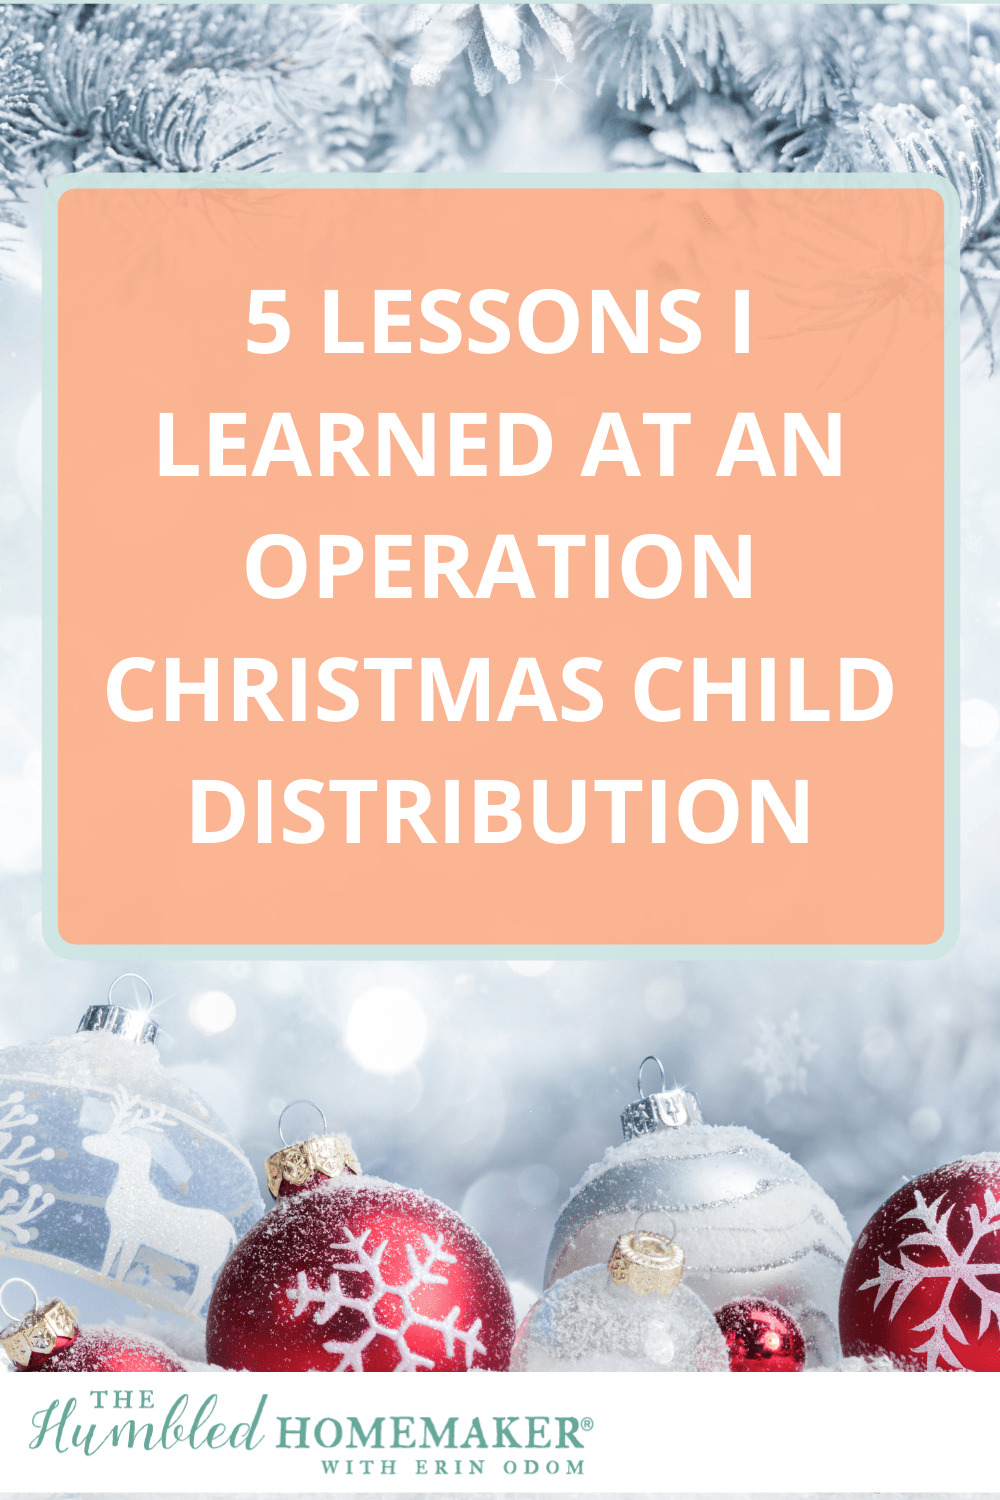 Our family was able to participate in an Operation Christmas Child distribution last week in Costa Rica. Yes, they distribute the boxes year-round! Here are some lessons I learned from participating in the distribution. 